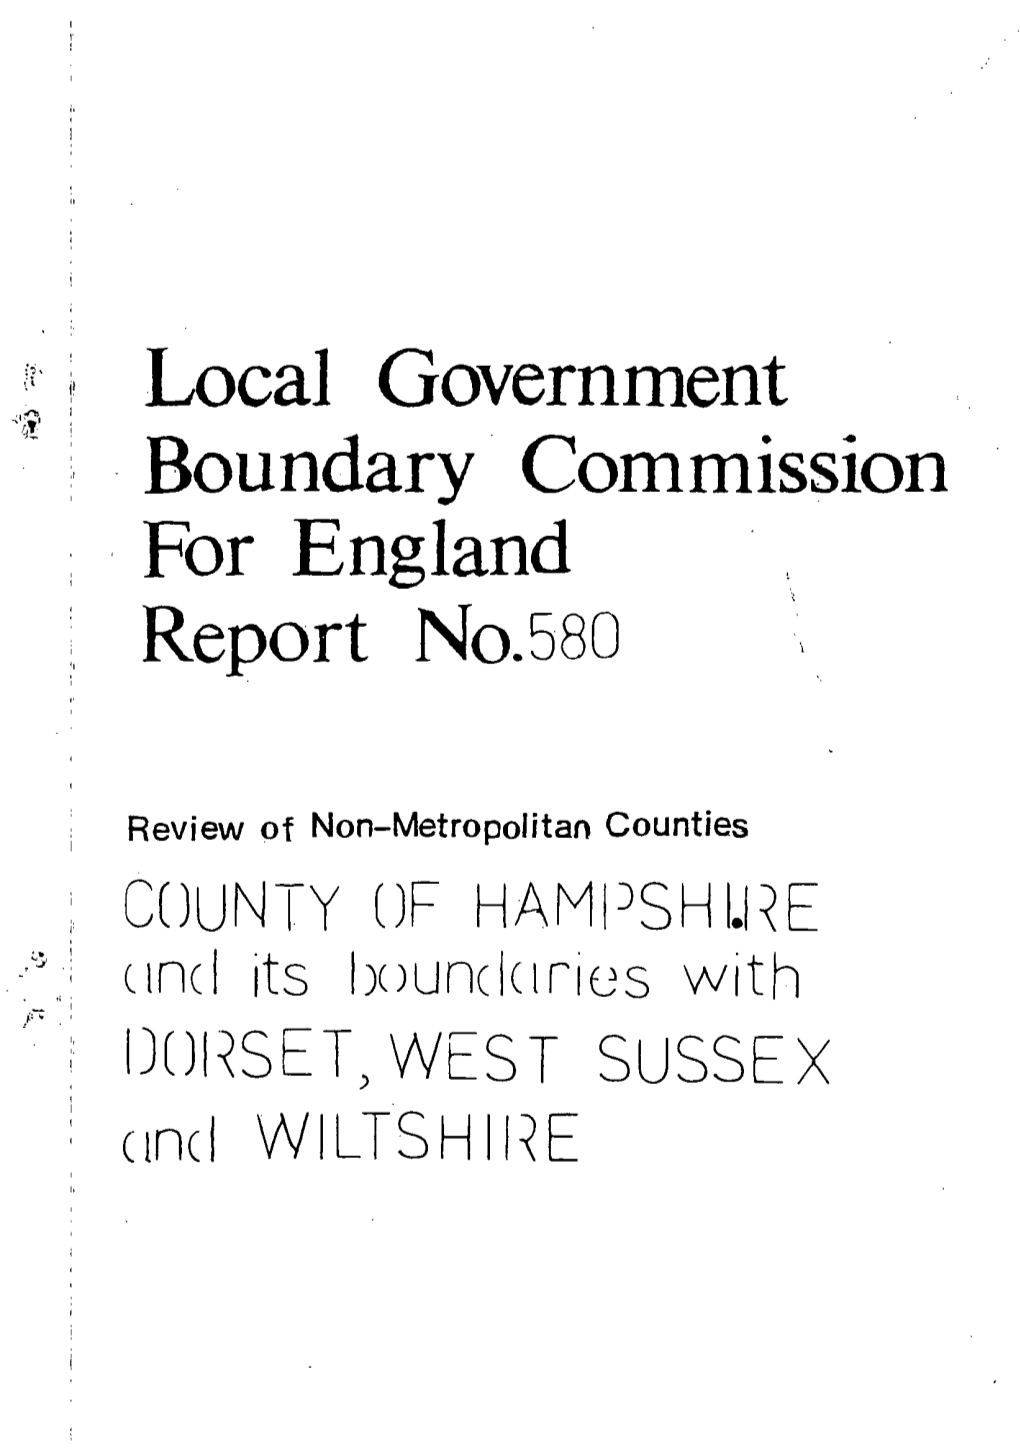 Local Government Boundary Commission for England Report No.580